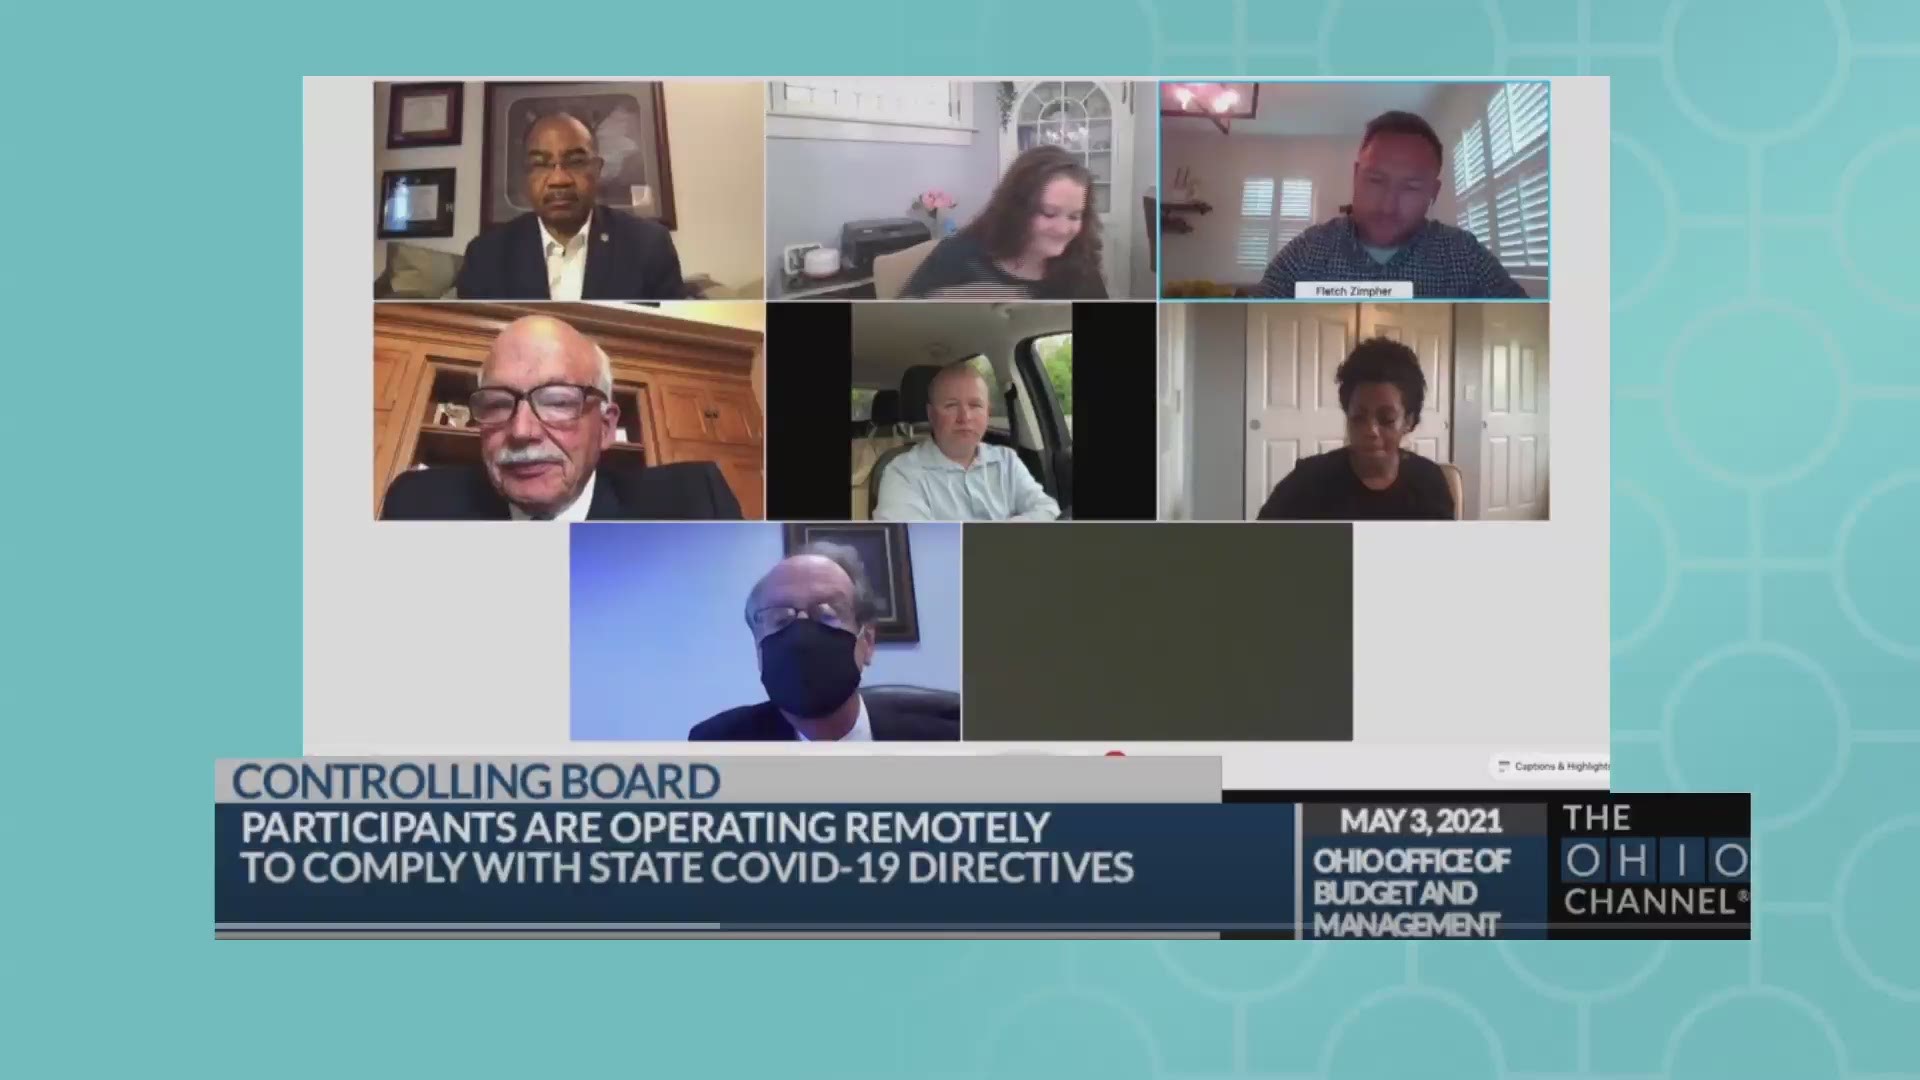 Sen. Andrew Brenner used a virtual background to appear as if he was home during an online government meeting.  However, he was actually driving his car.